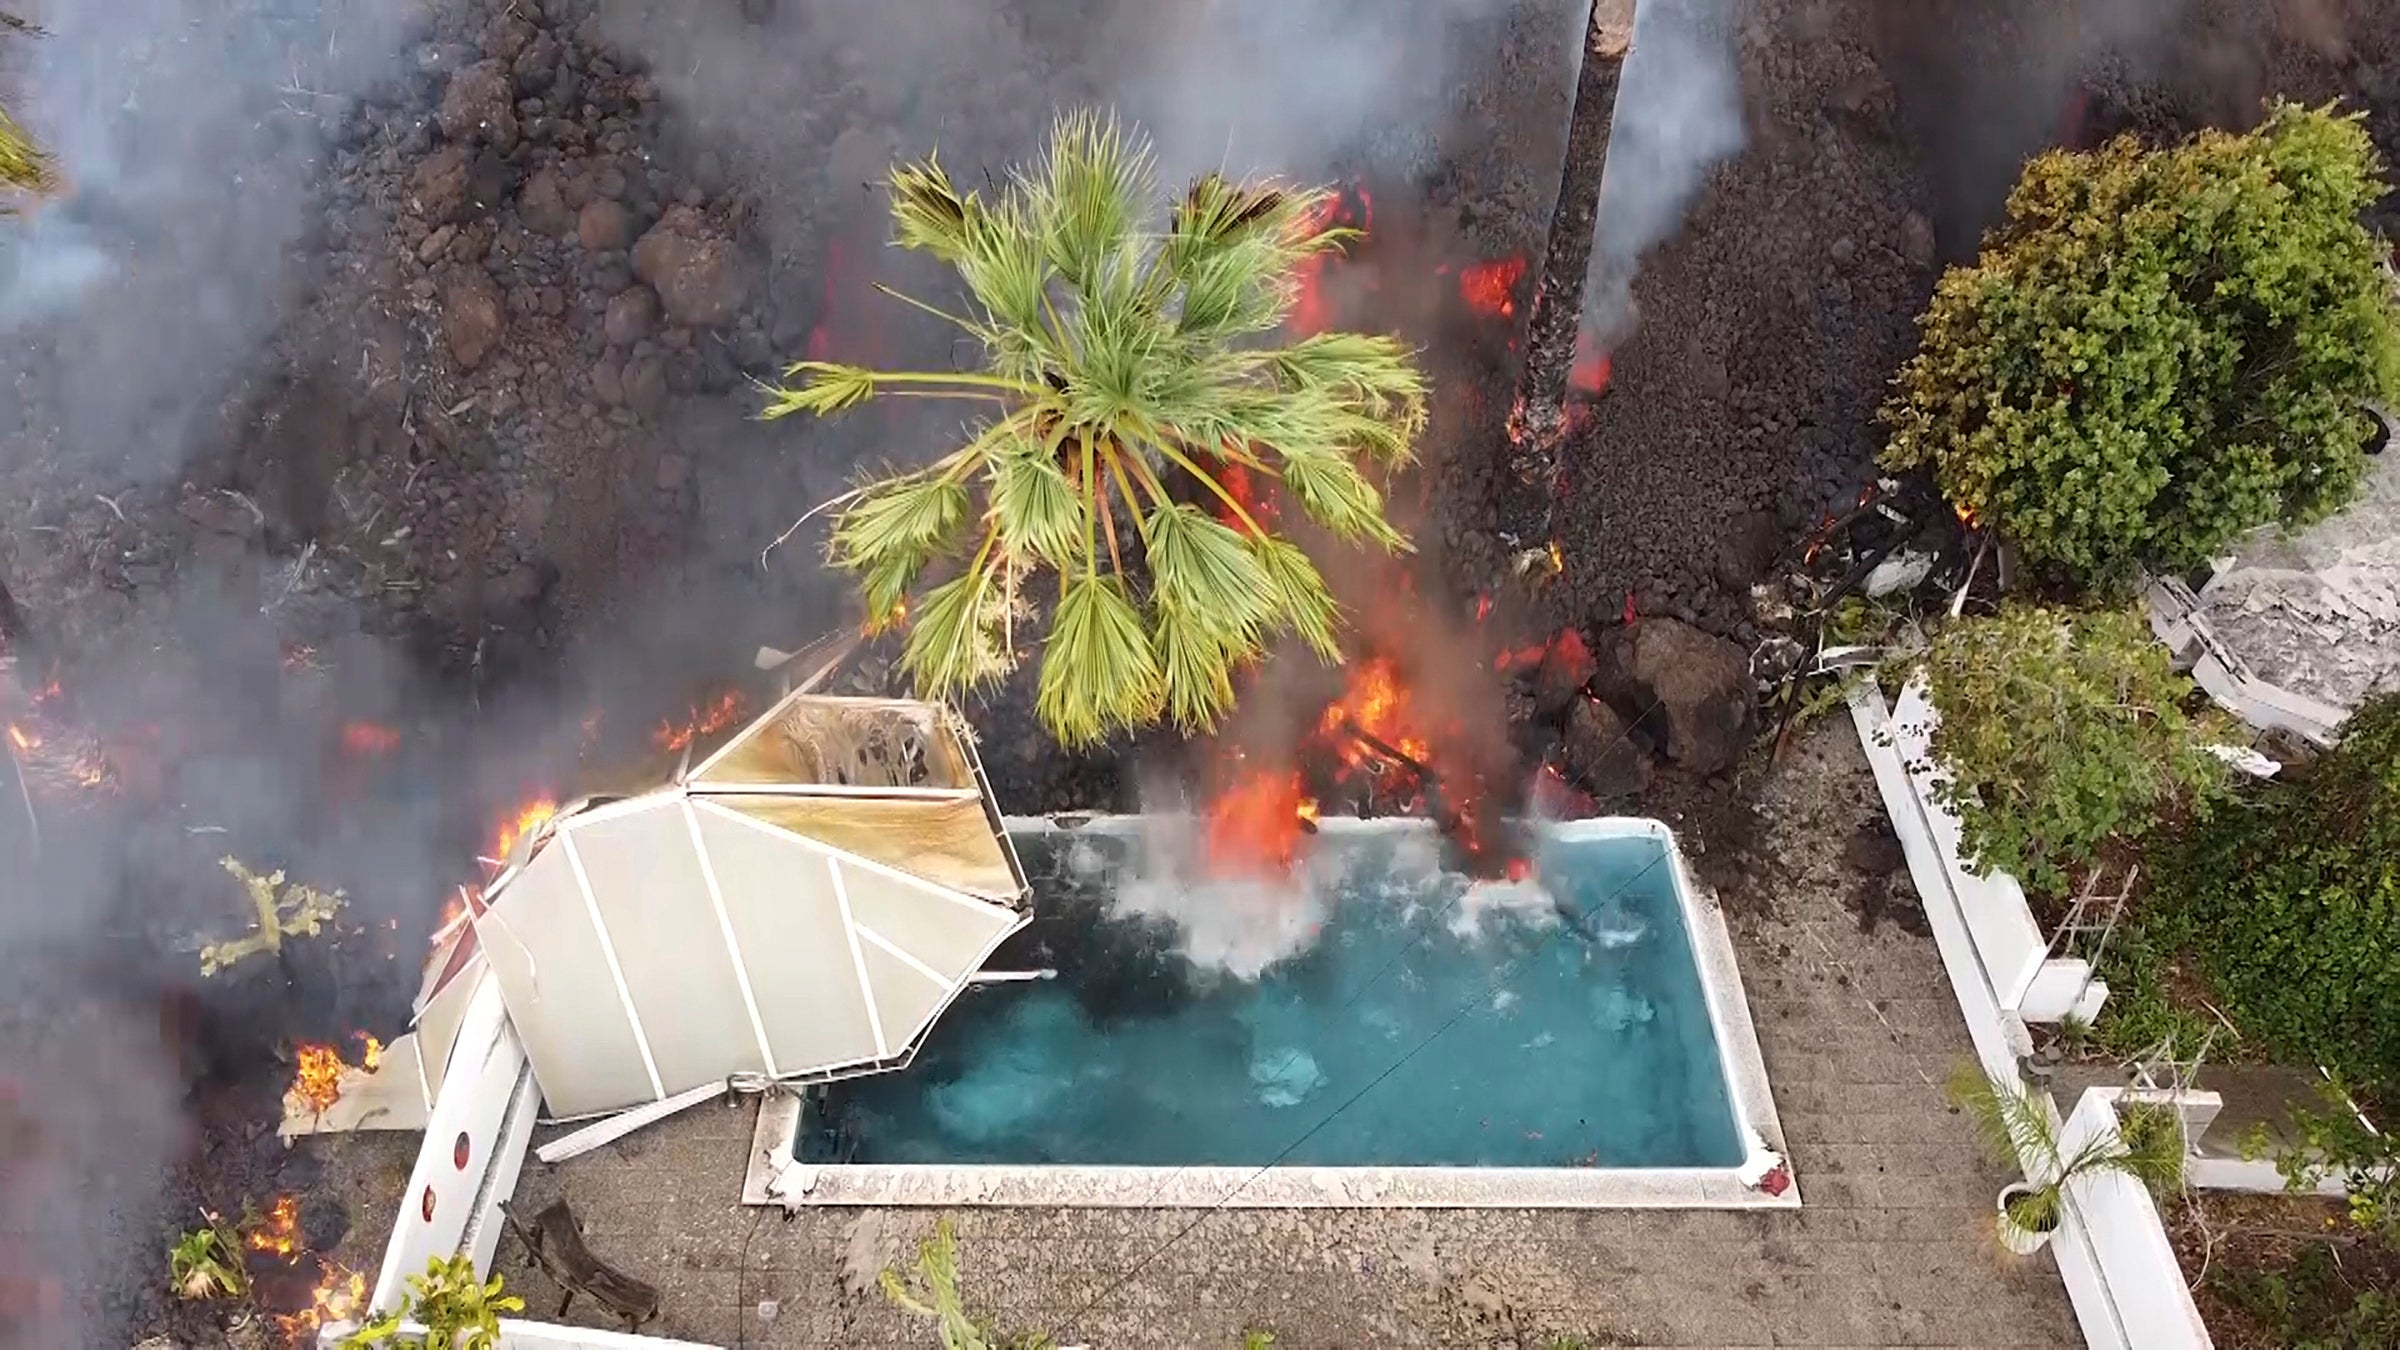 Hot lava reaches a swimming pool after an eruption of a volcano on the island of La Palma